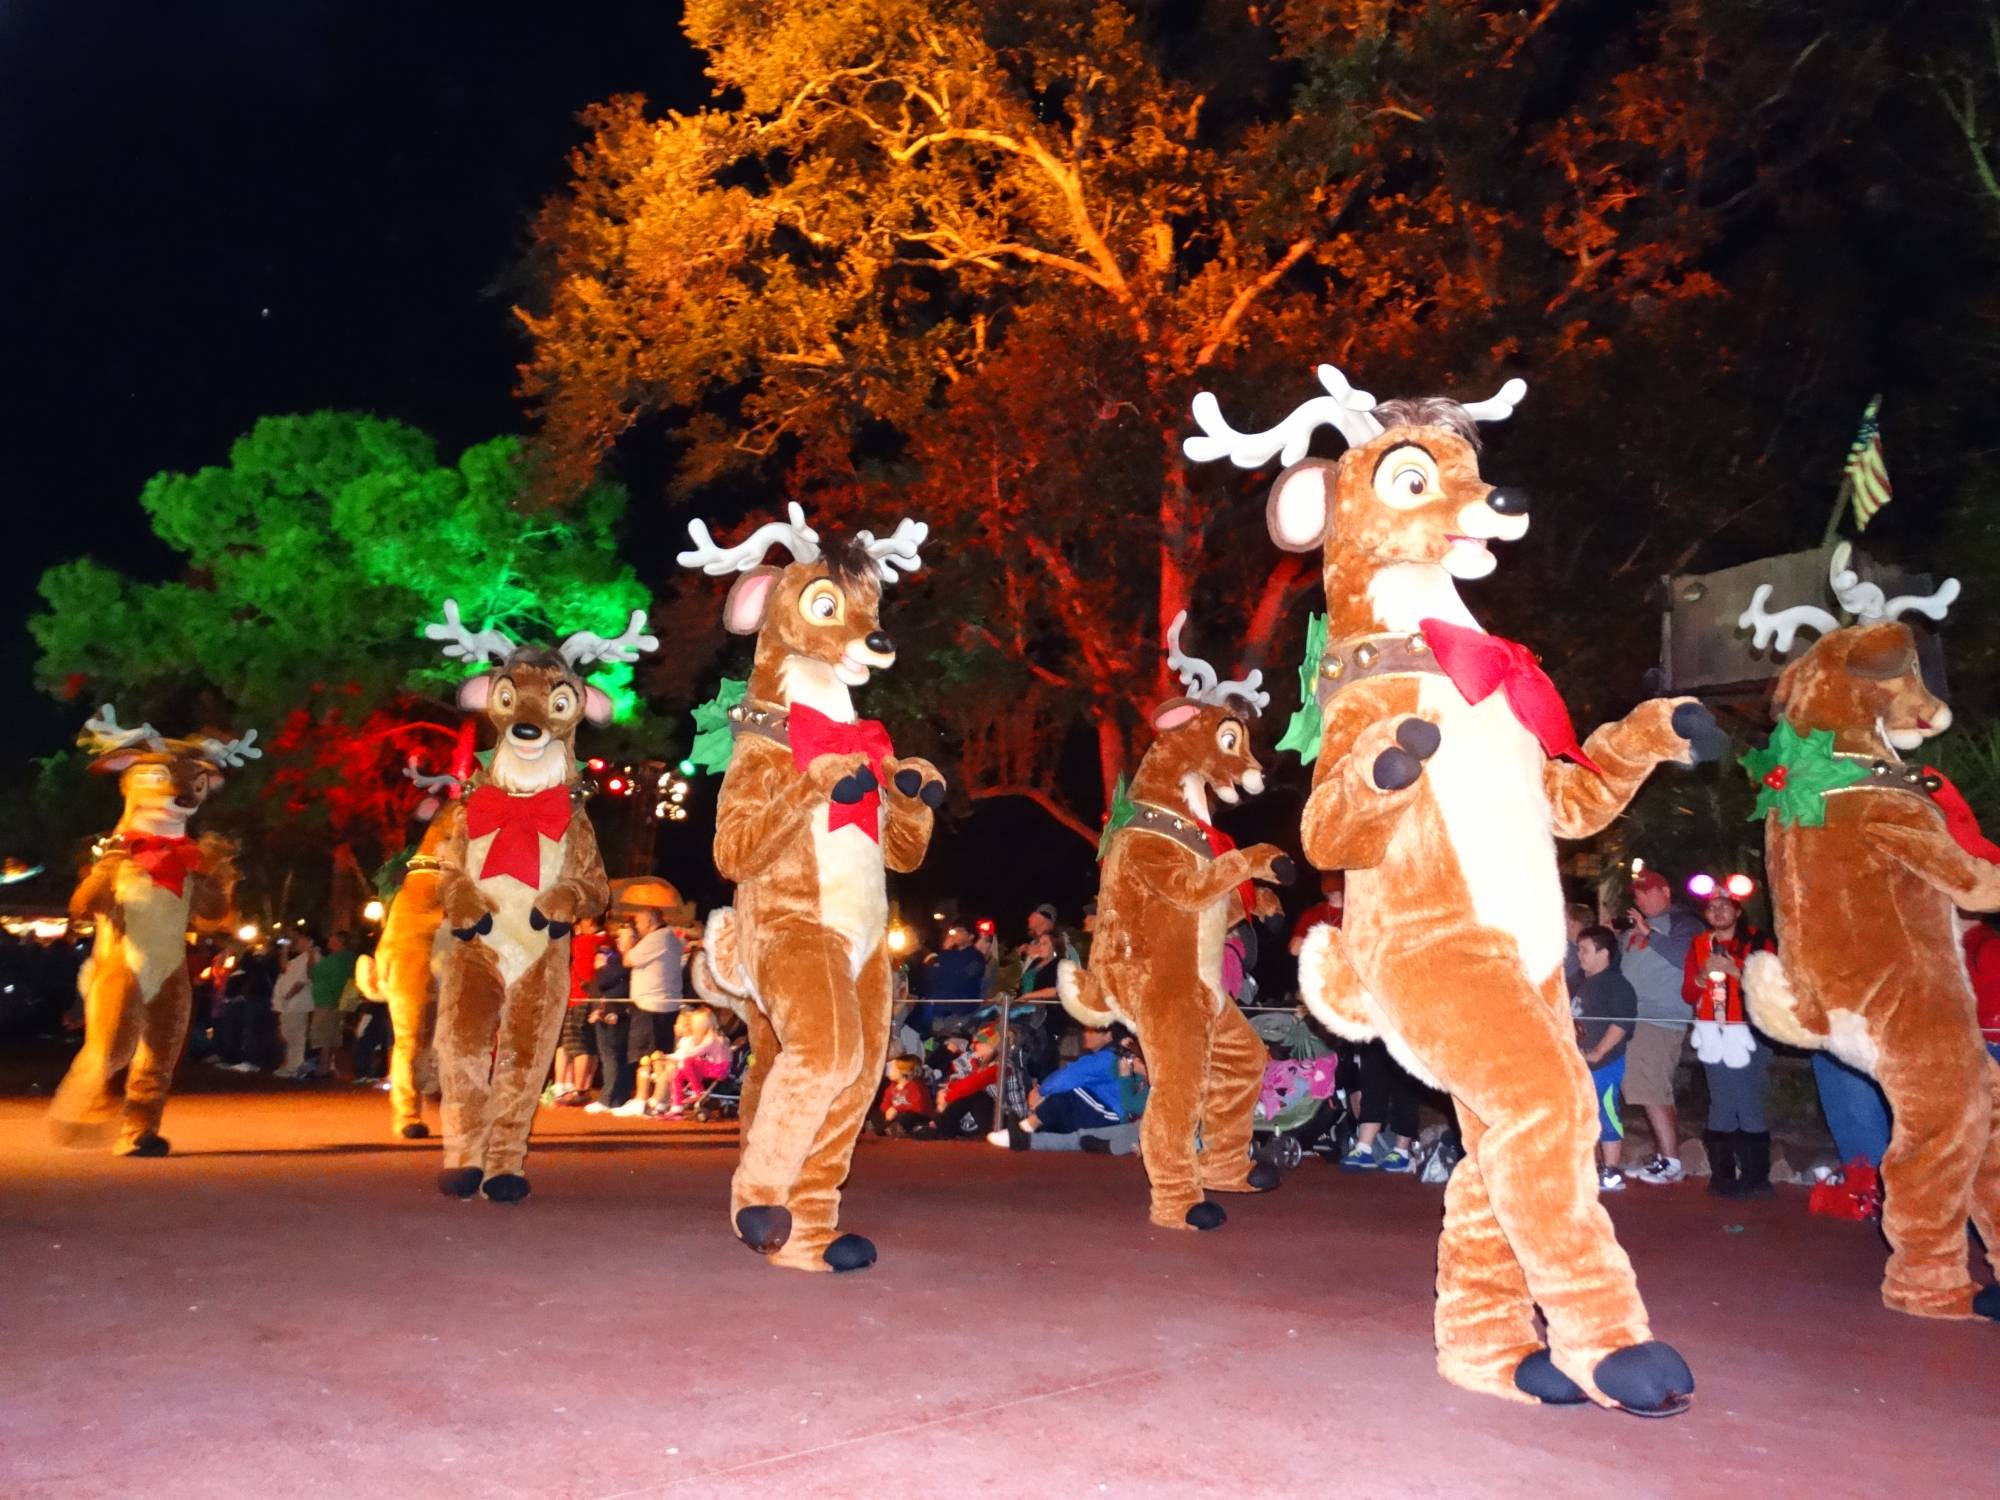 Celebrate the holidays with Mickey at Mickey's Very Merry Christmas Party |PassPorter.com